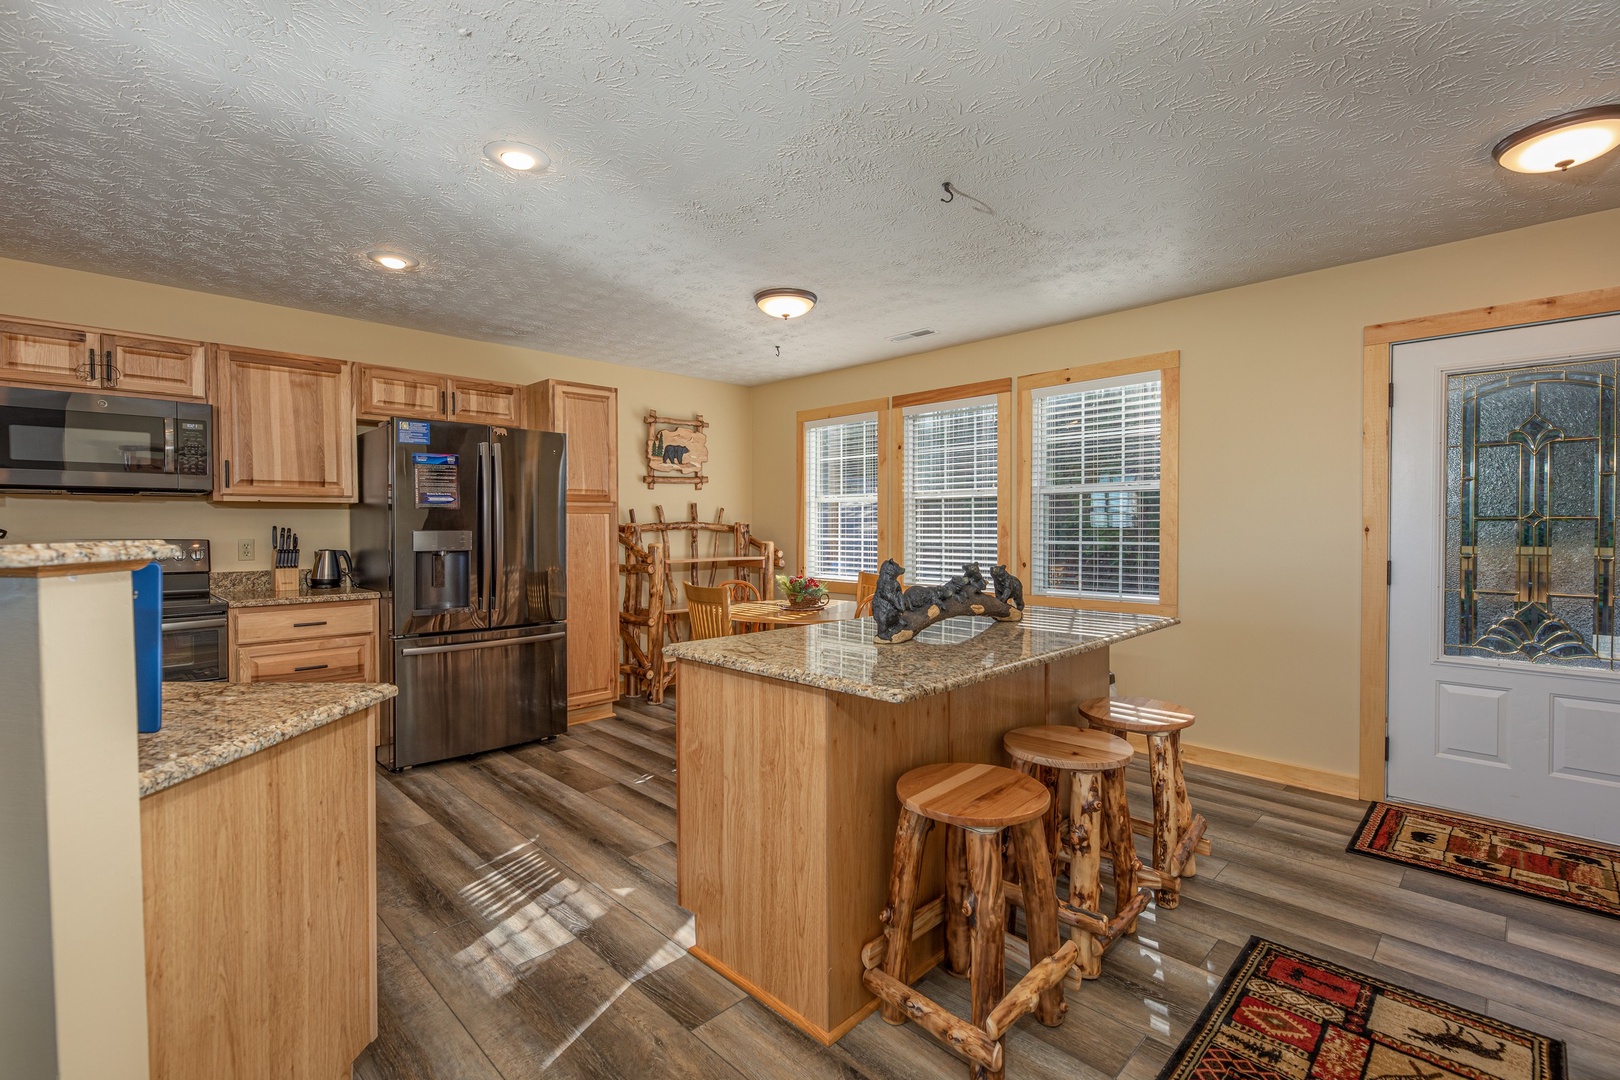 Kitchen with granite counters, stainless appliances, and a breakfast bar at Le Bear Chalet, a 7 bedroom cabin rental located in Gatlinburg